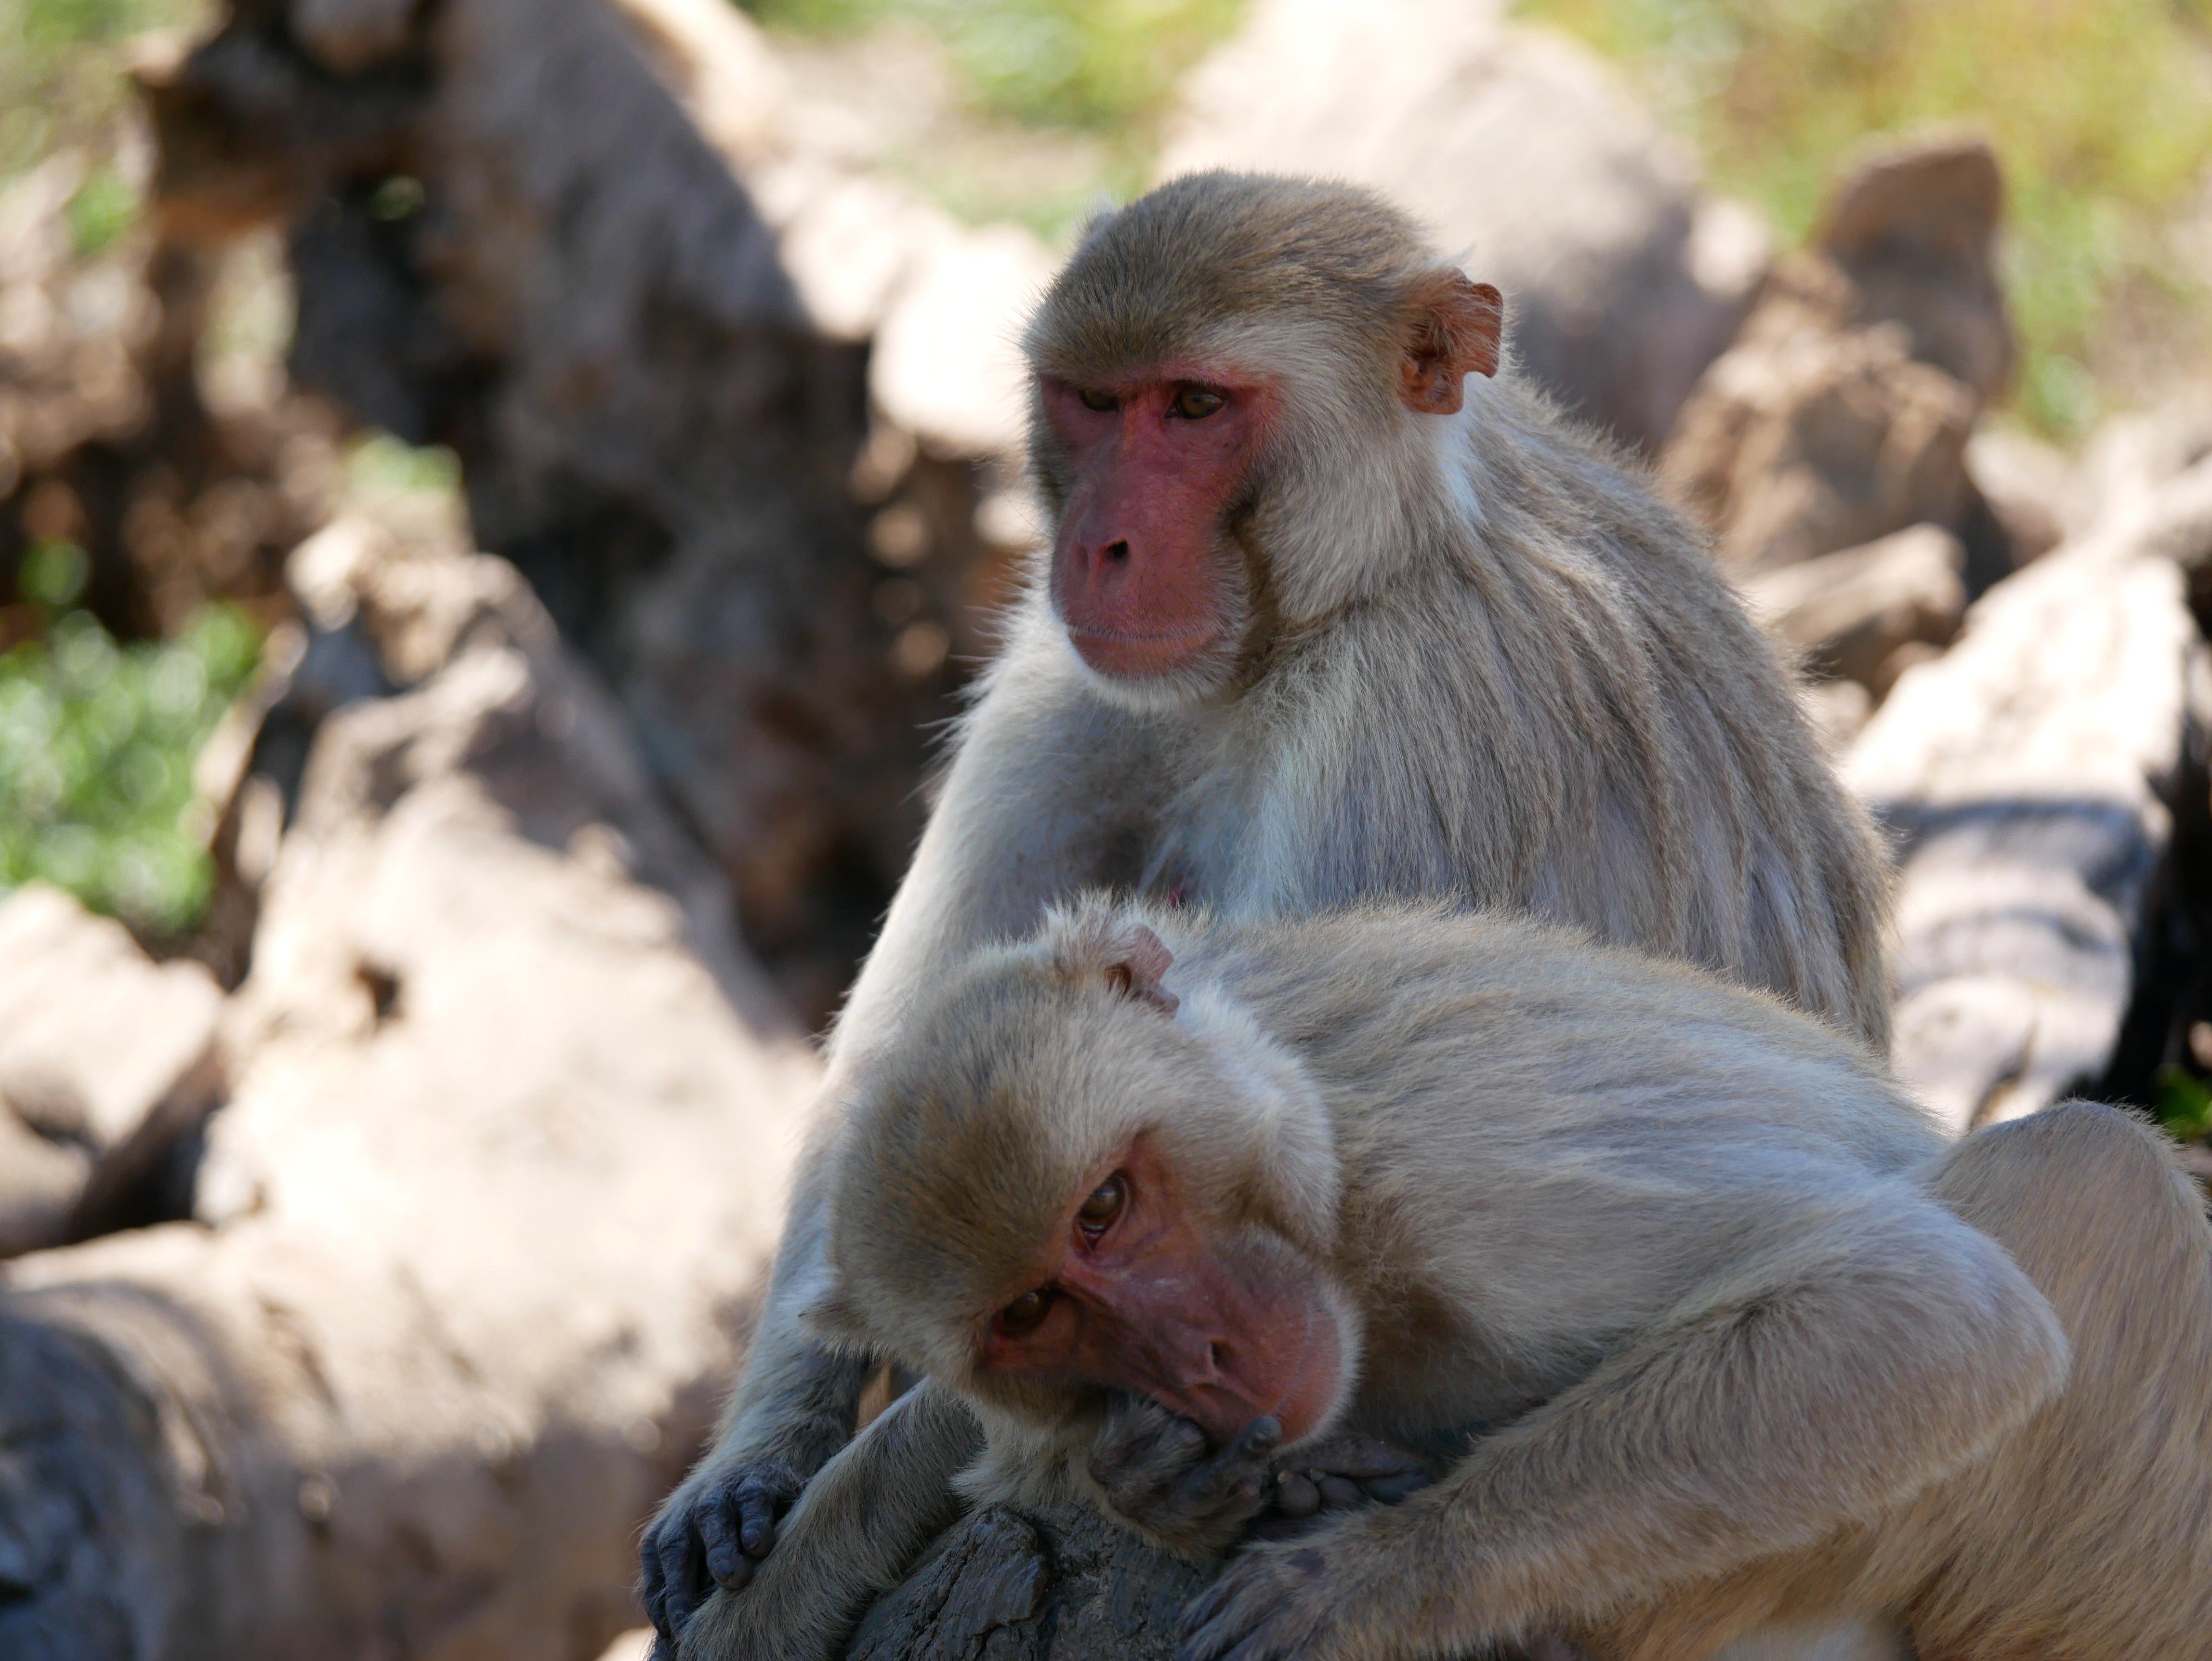 Male Monkeys Have More Sex with Other Males Than with Females in This Well-Studied Group